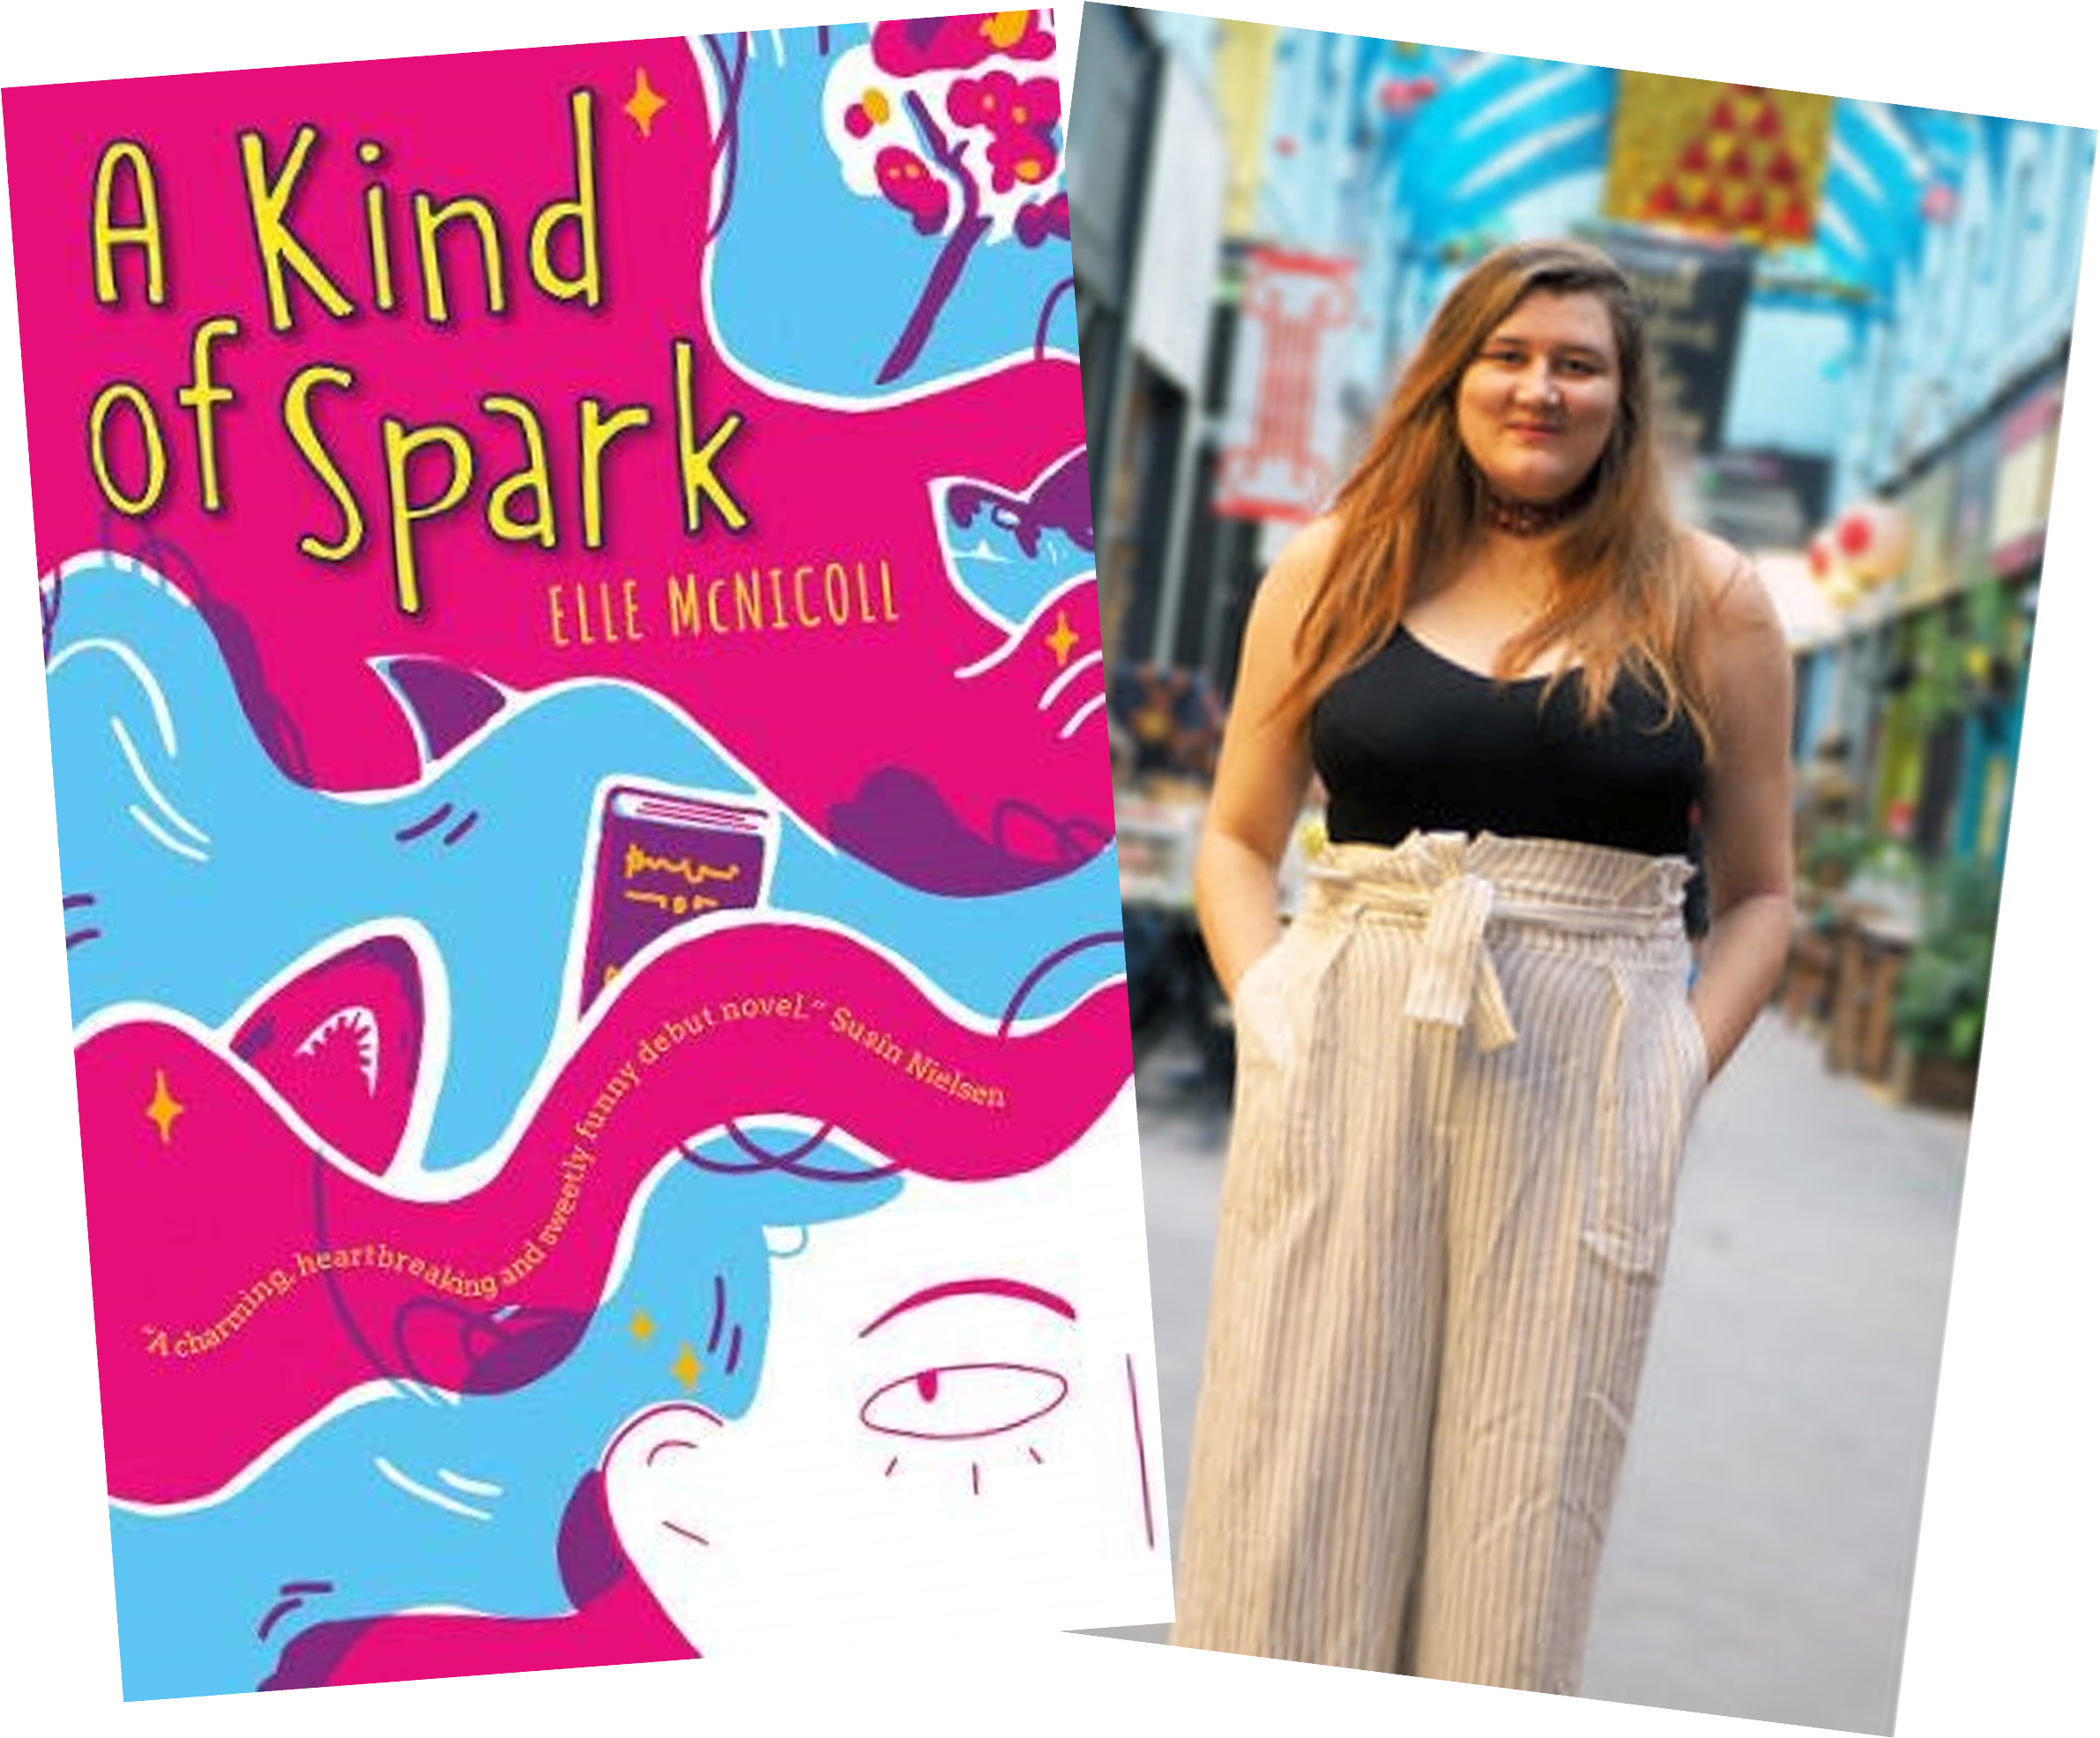 Left image: Book cover of 'A Kind of Spark. Right image: Photograph of the author Elle McNicoll